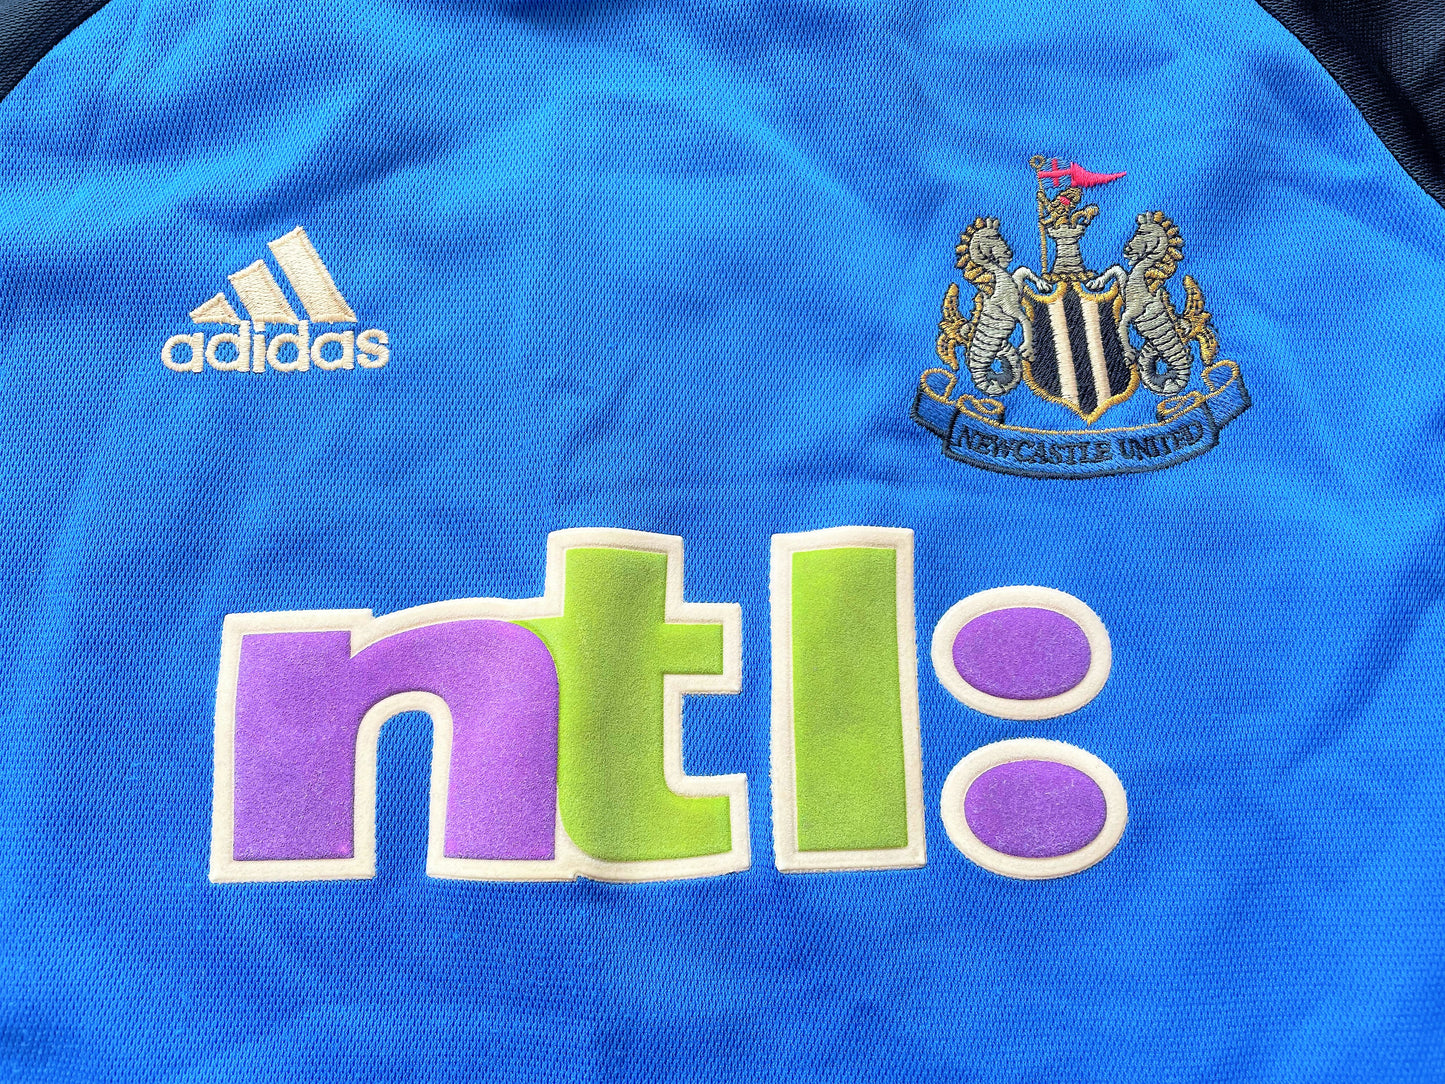 Newcastle Goalkeeper Shirt 2000 (very good) Adults Small/Youths